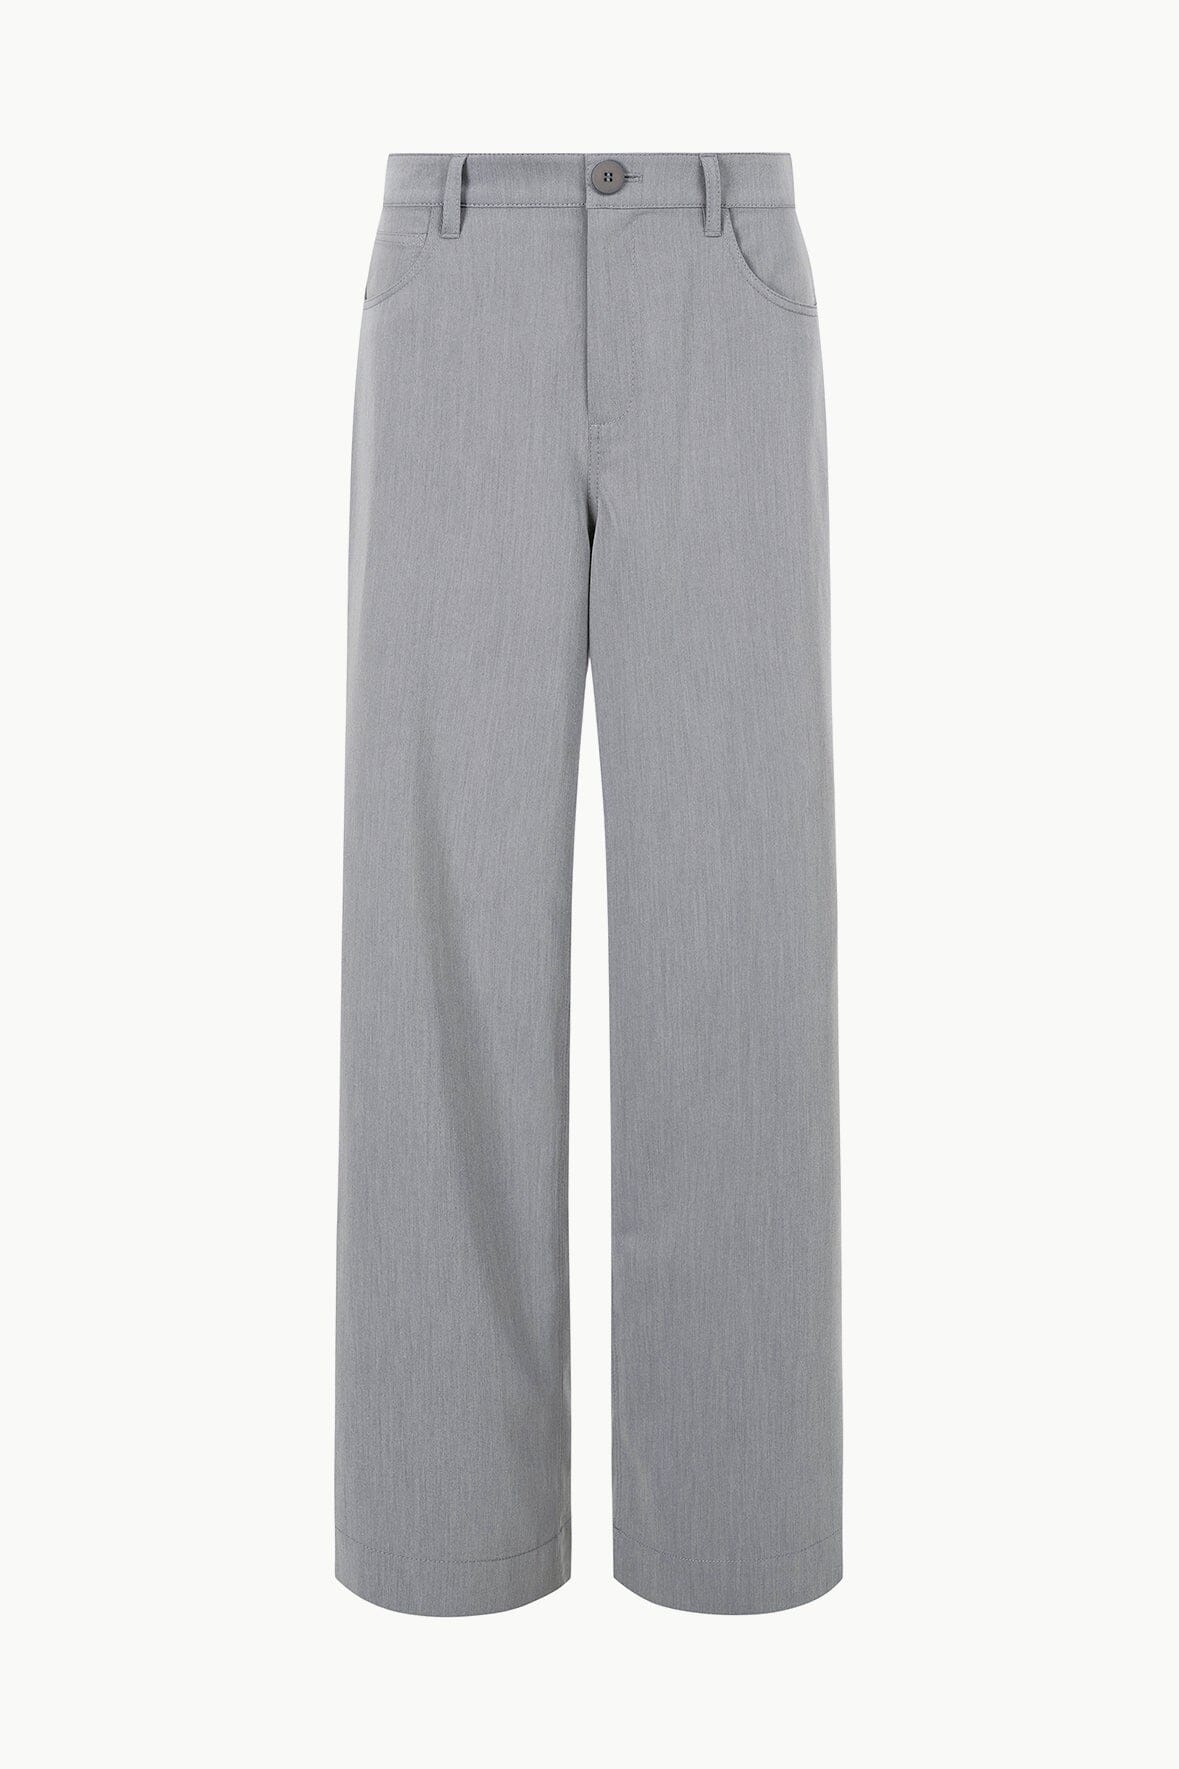 GRAYSON PANT | HEATHER GREY SUITING